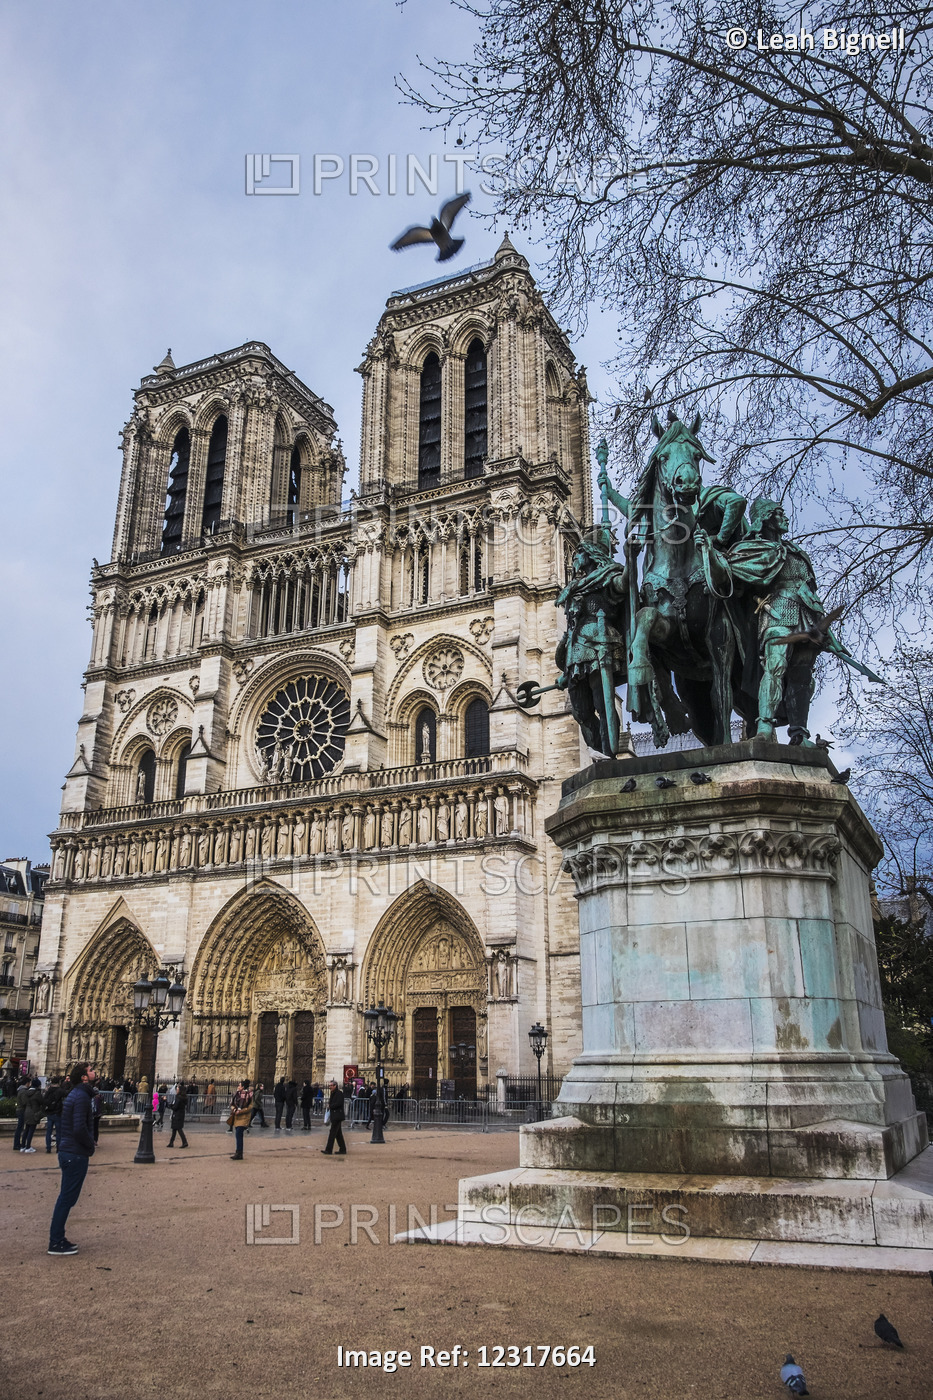 Statue Of Charlemagne In Front Of The Notre Dame Cathedral; Paris, France